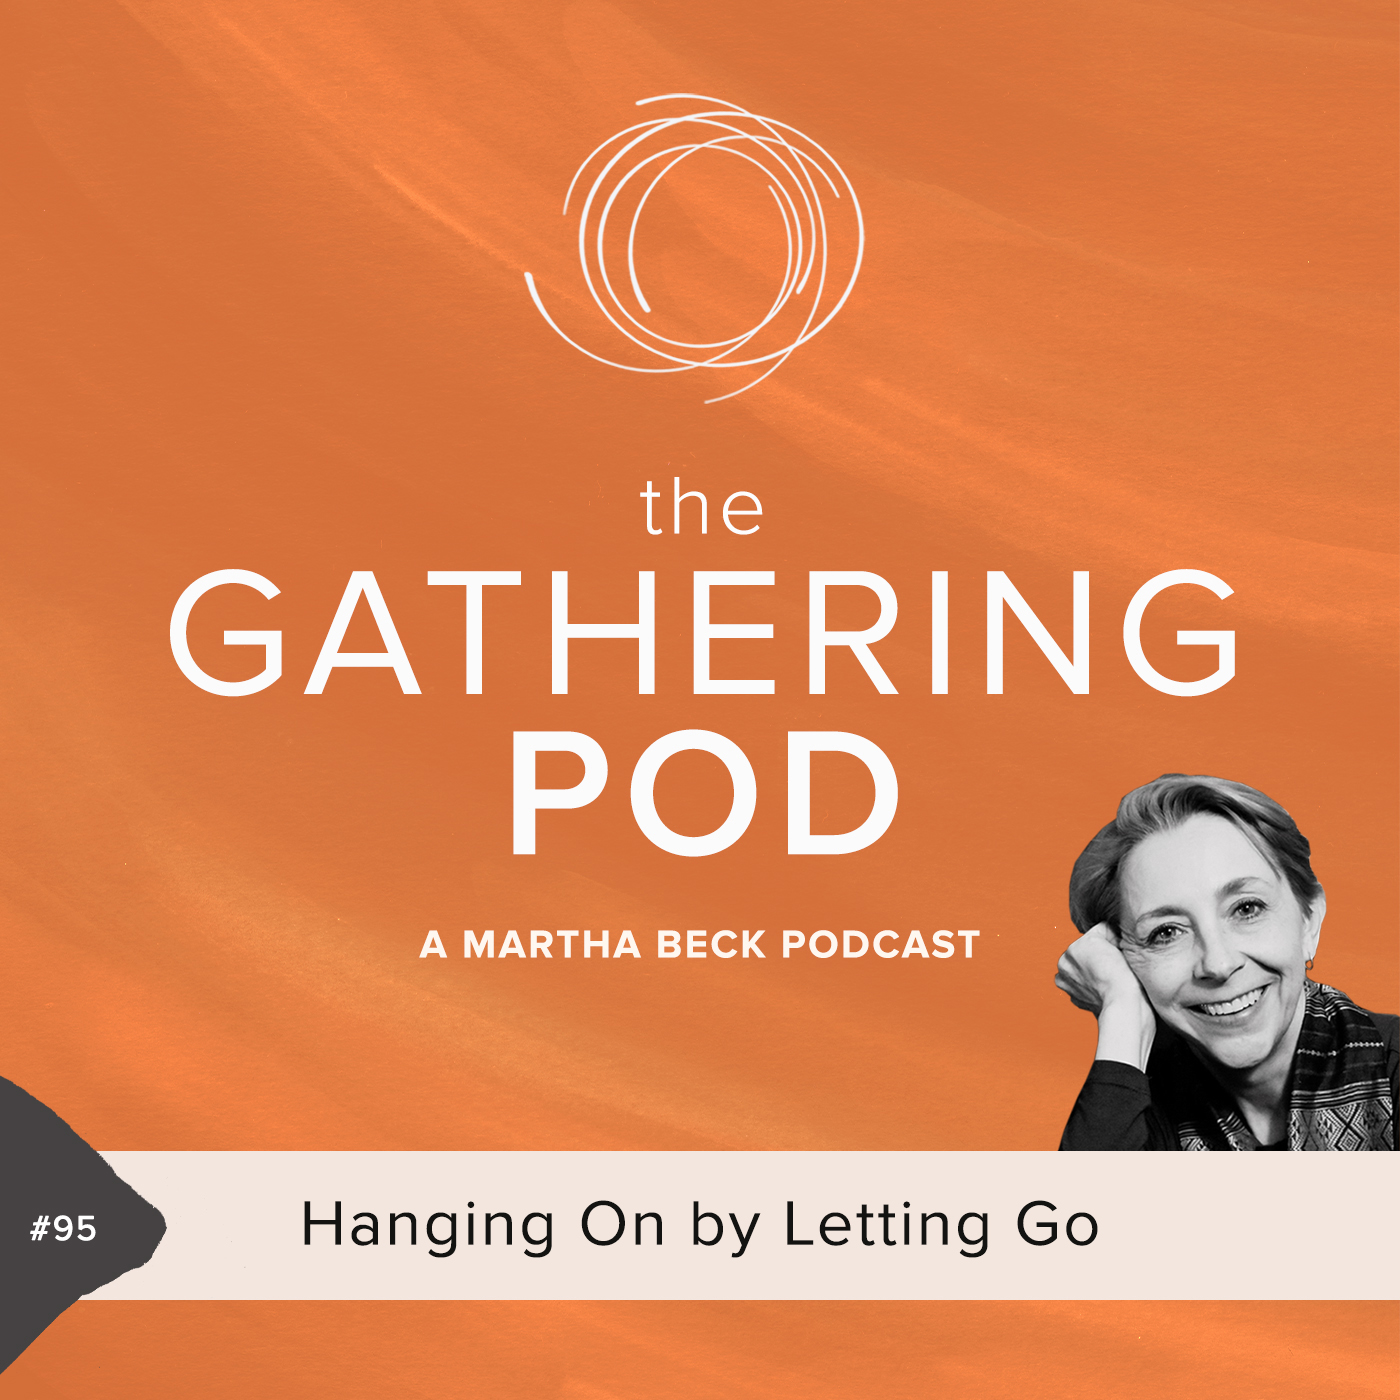 Image for The Gathering Pod A Martha Beck Podcast Episode #95 Hanging On by Letting Go